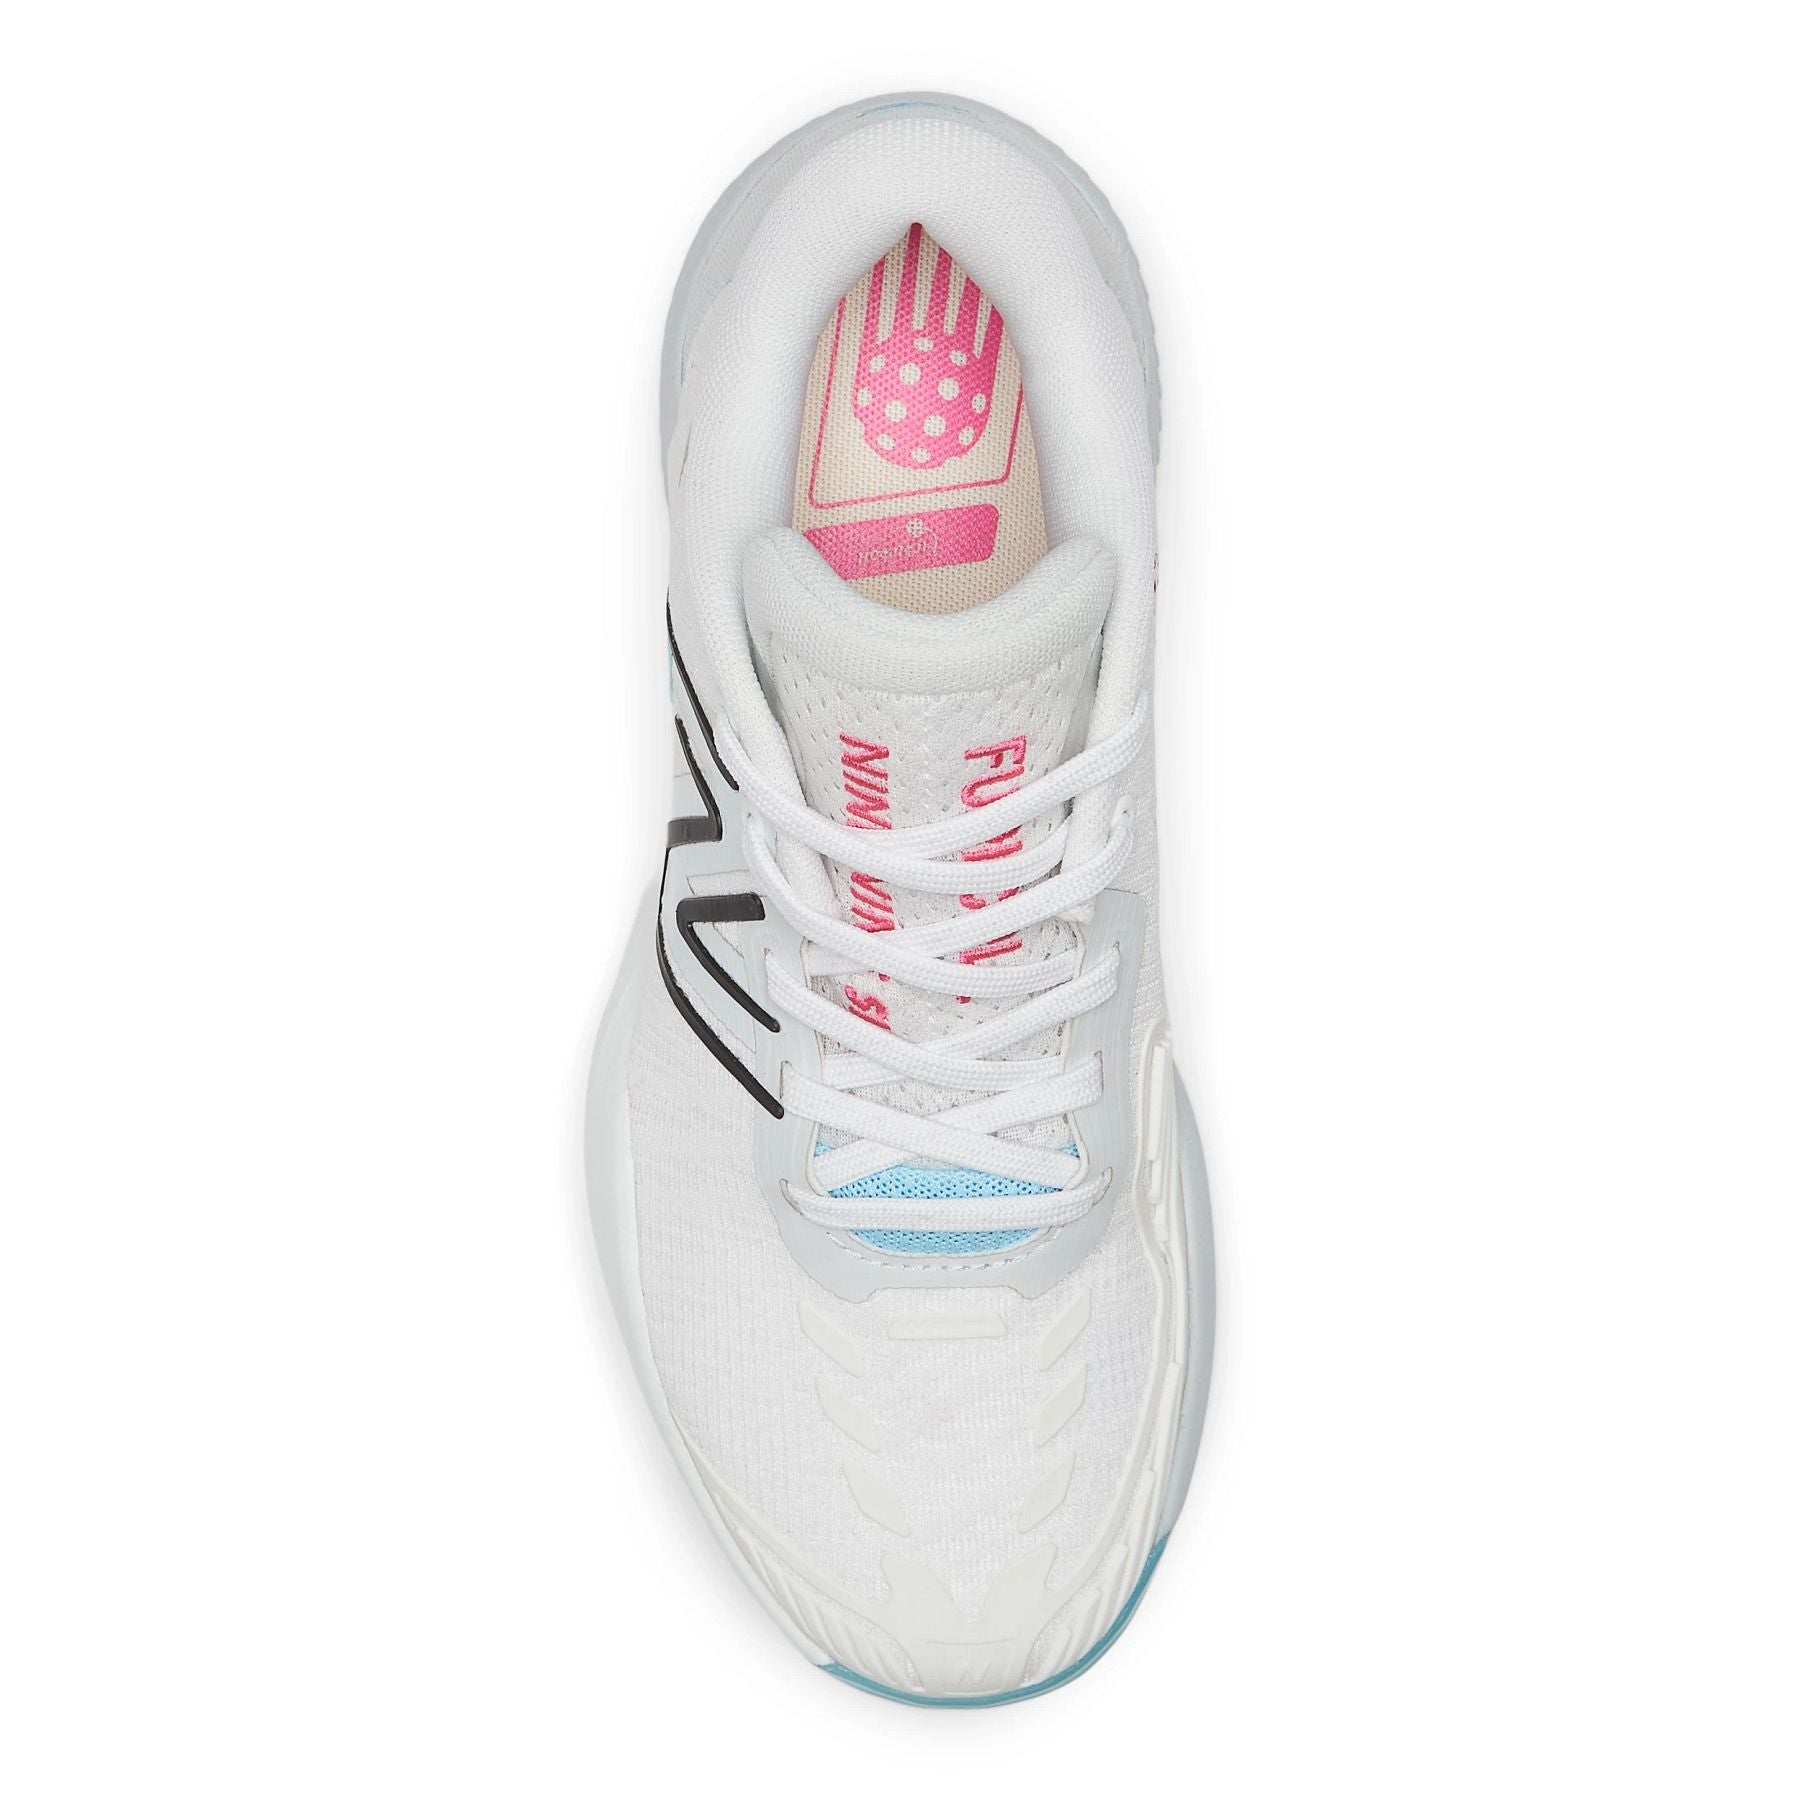 Top view of the Women's Fuel Cell 996 V5 New Balance Pickleball shoe in White with grey and team red